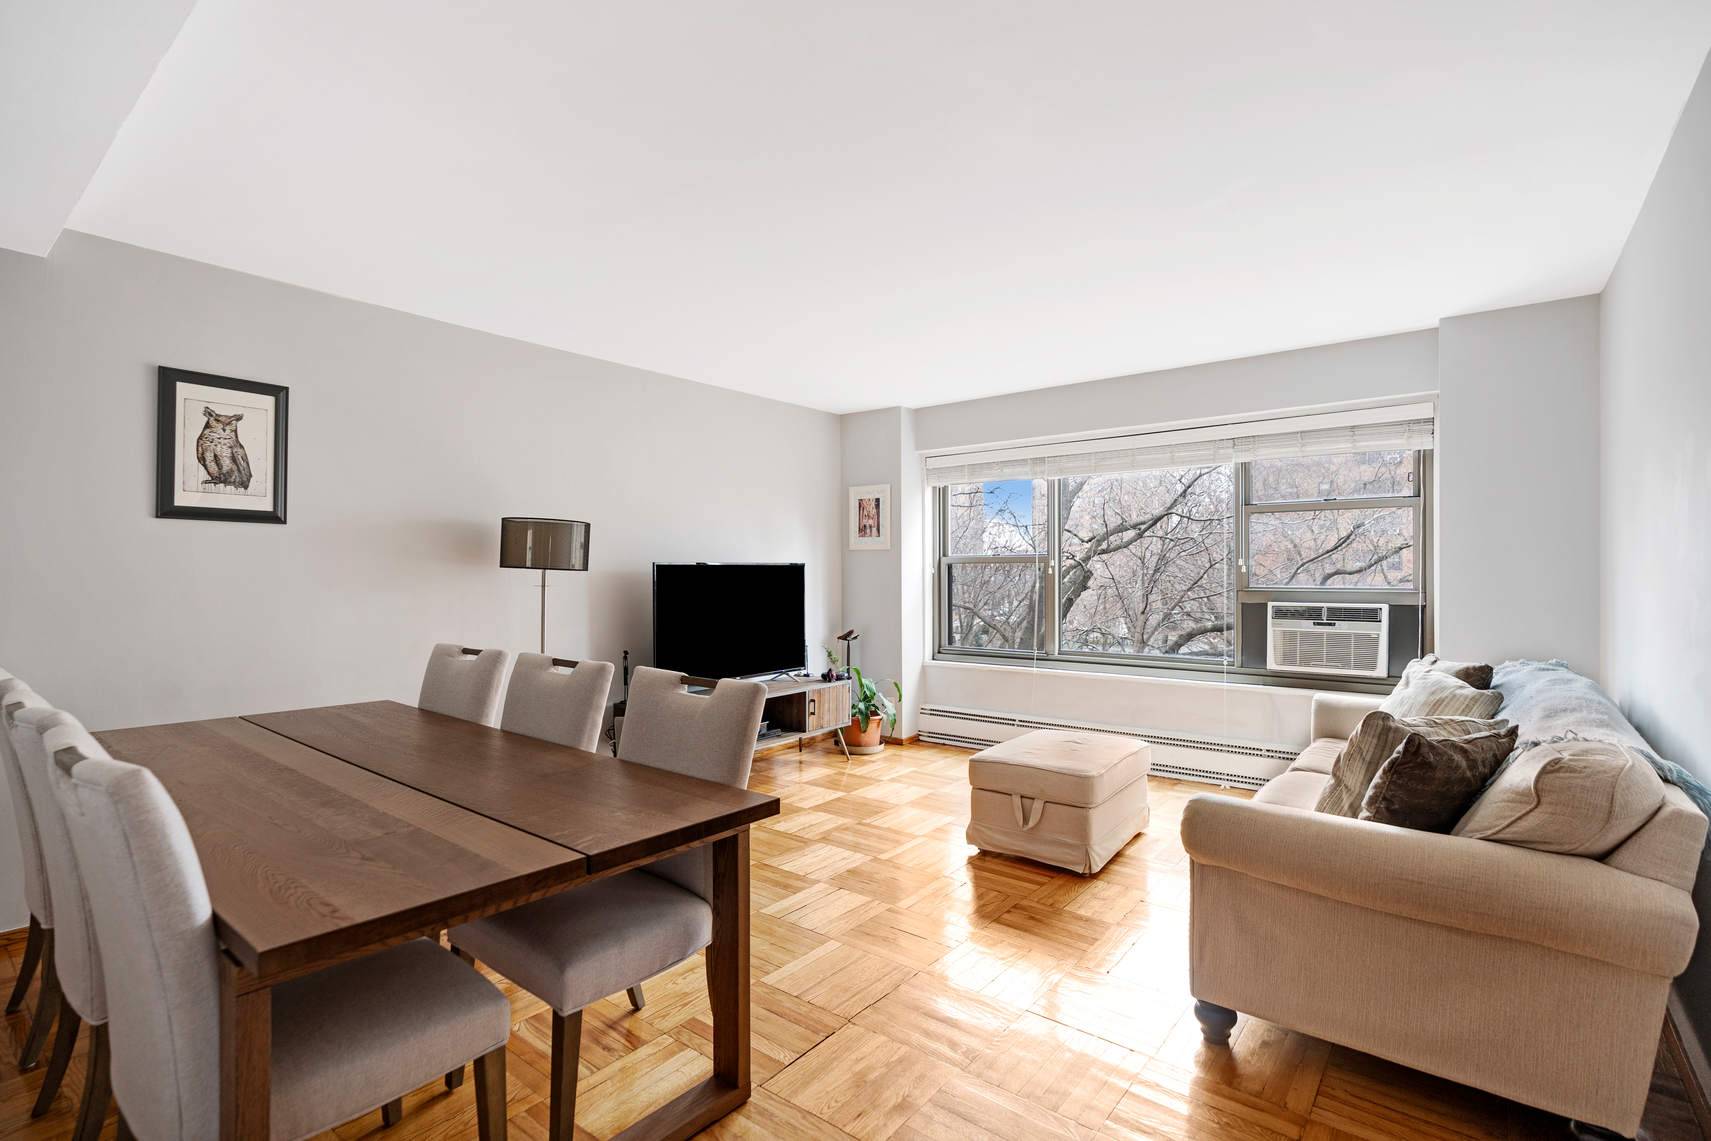 Renovated and spacious 2br with hardwood floors overlooking Queensview's park like grounds.